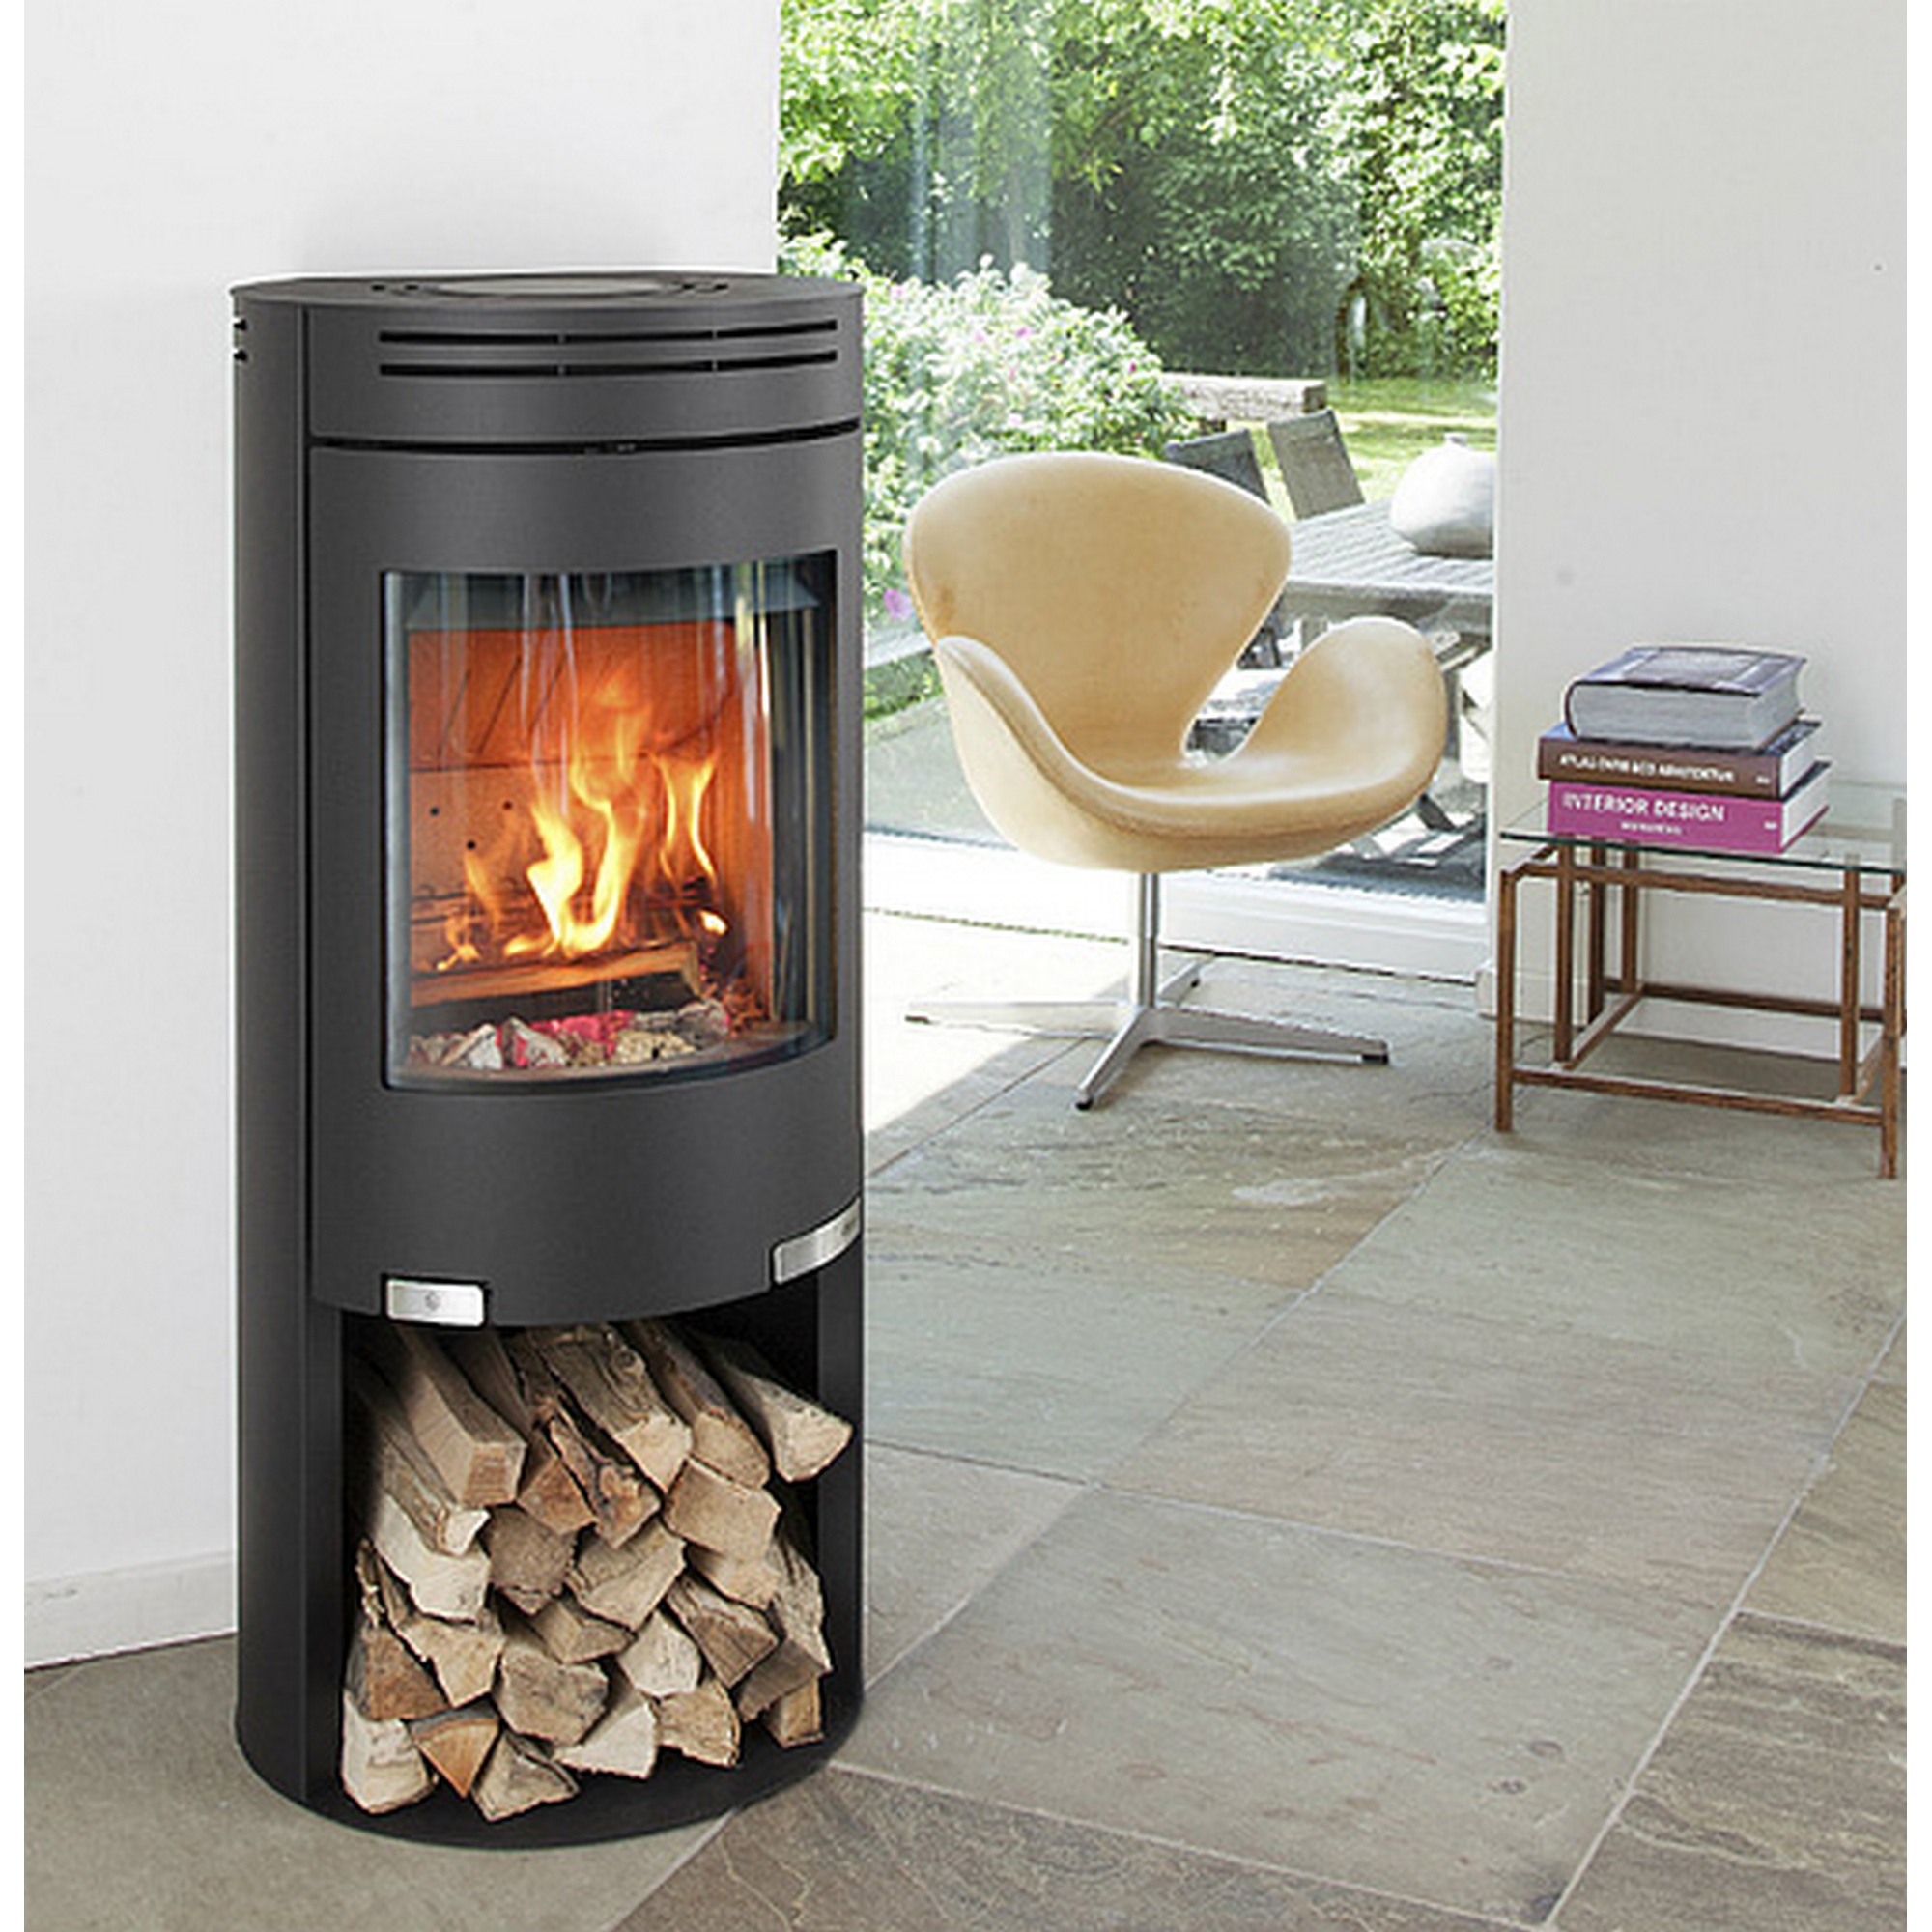 Kaminofen '1.4' Stahl 6 kW + product picture